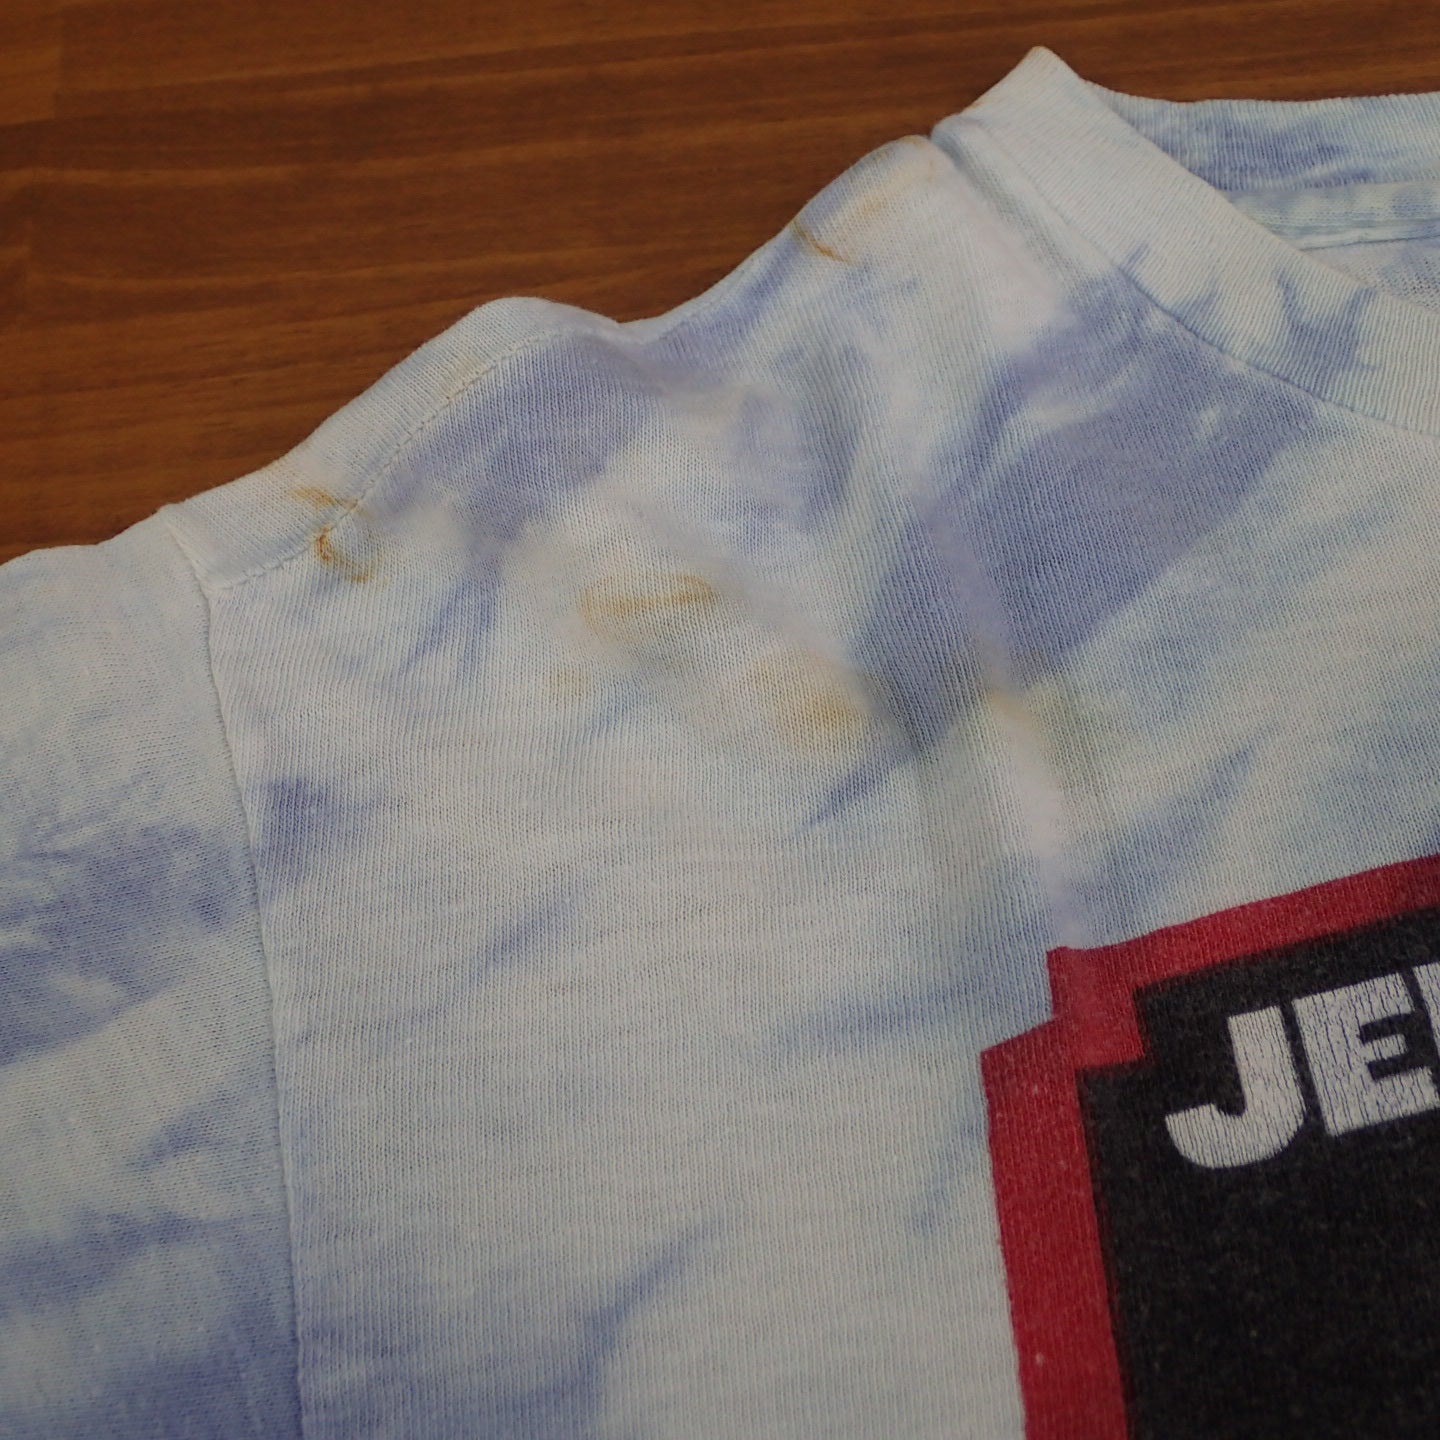 70s Jeff Beck " Wired Tee"